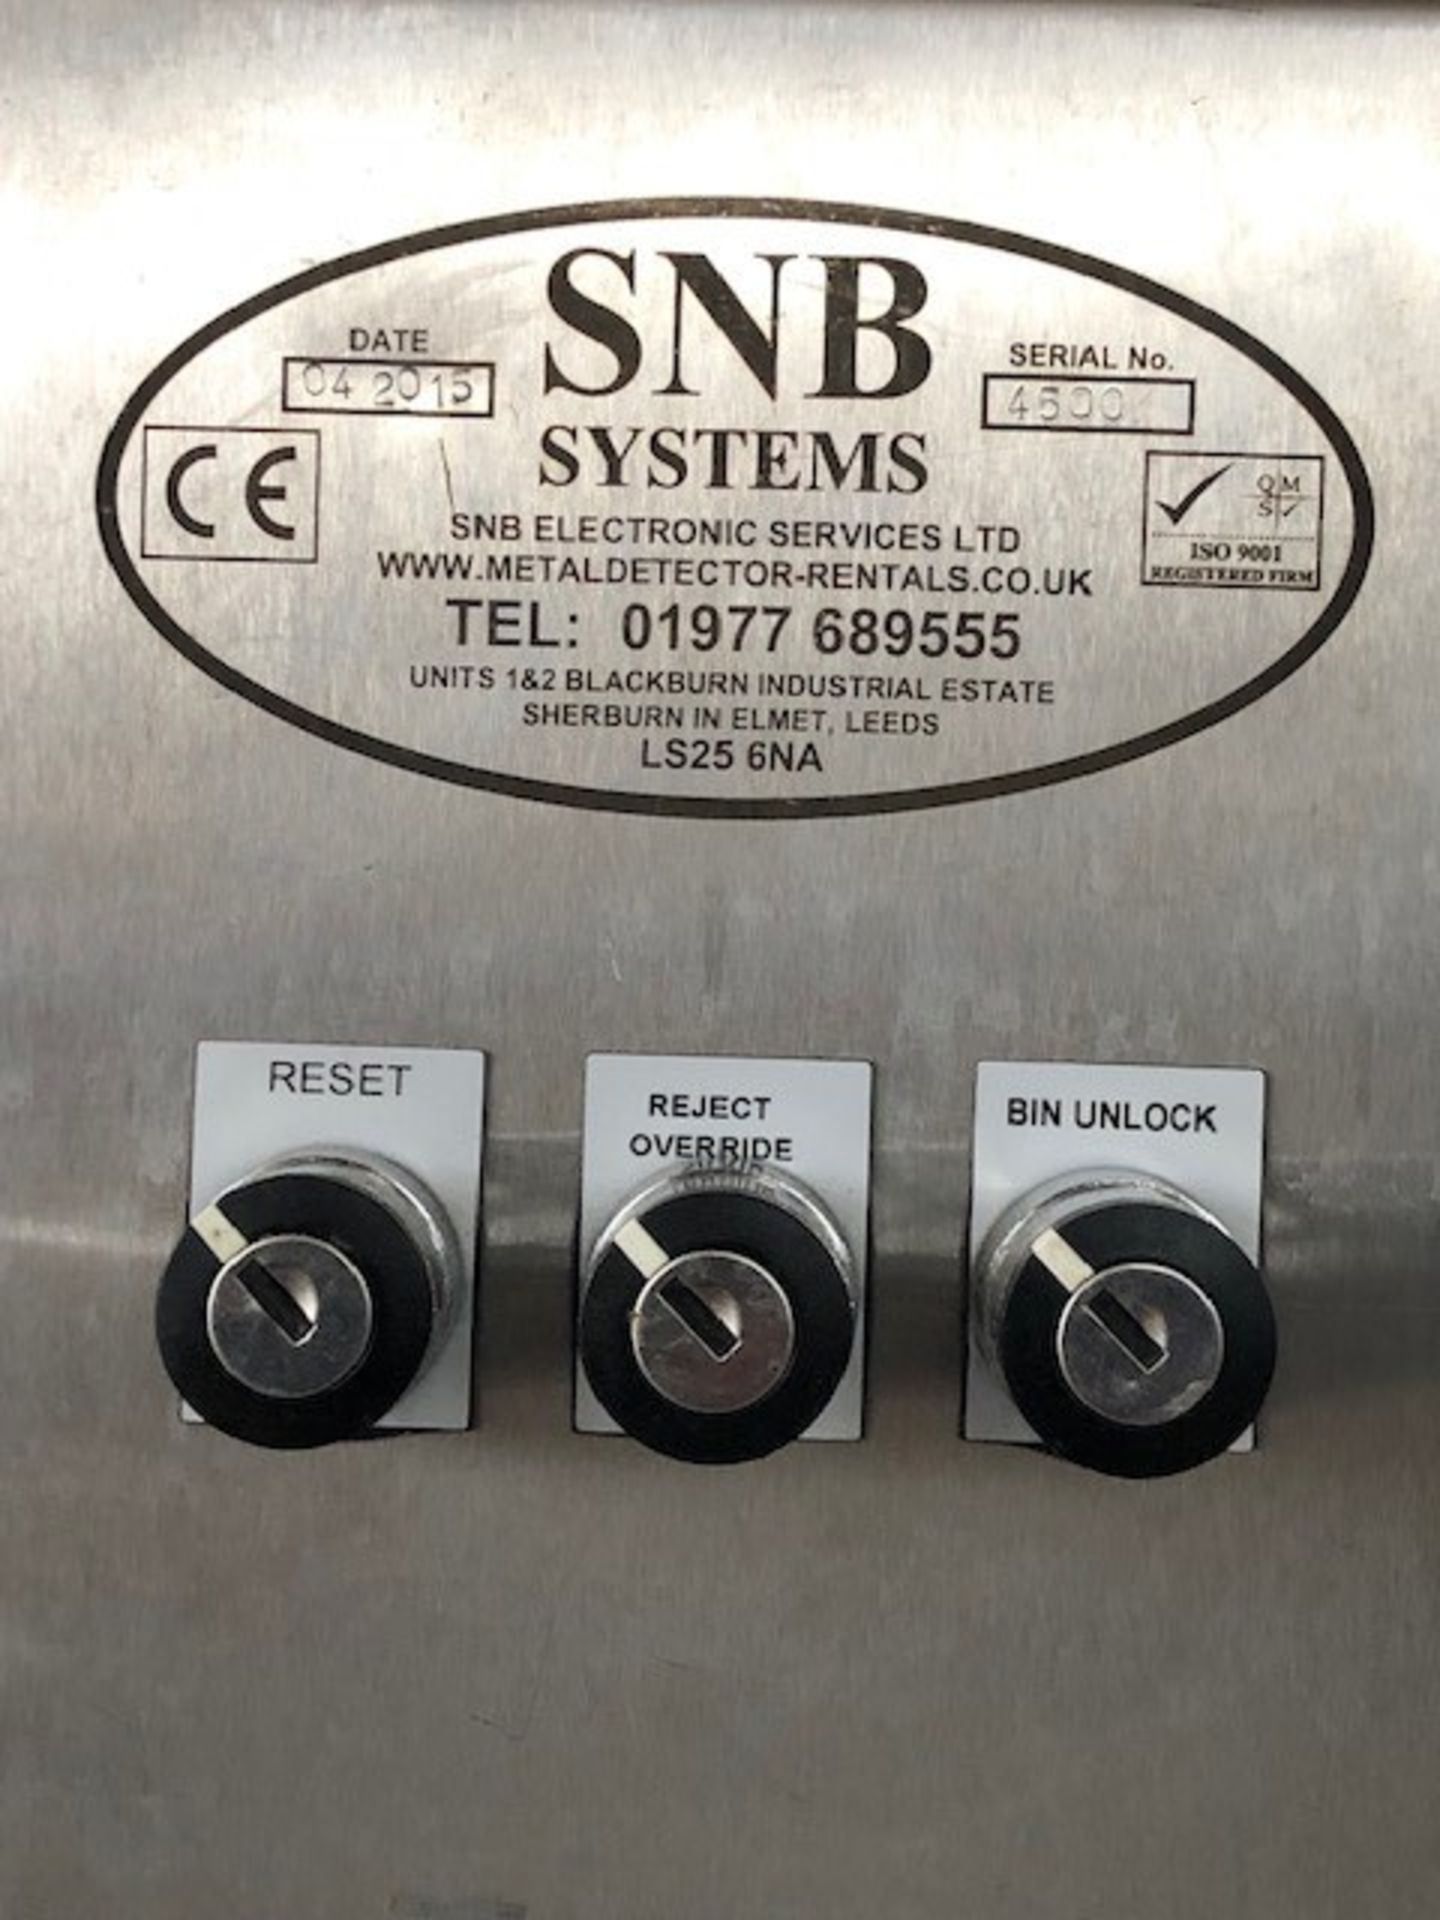 SNB Systems metal detector with reject bin (2015) - Image 4 of 7